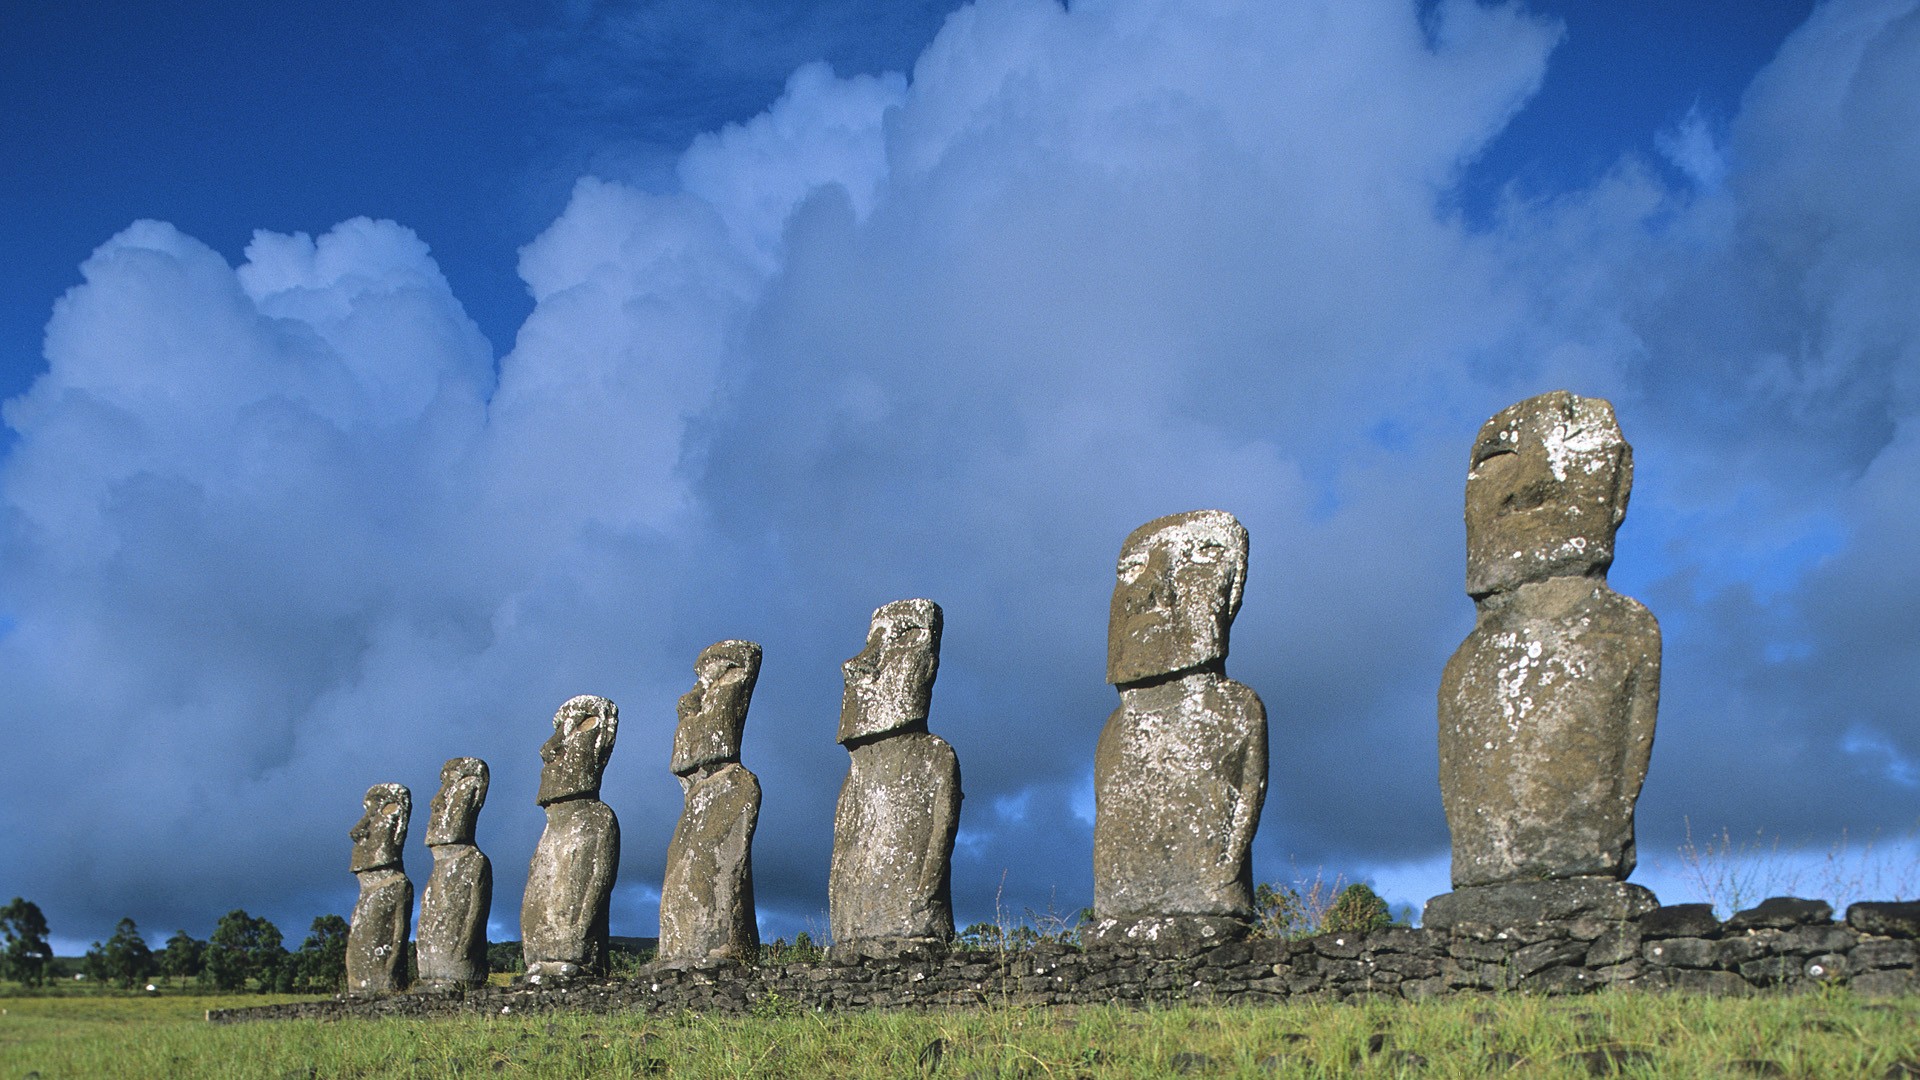 Wide HD Cool Easter Island Pictures Wallpaper Flgx Kb